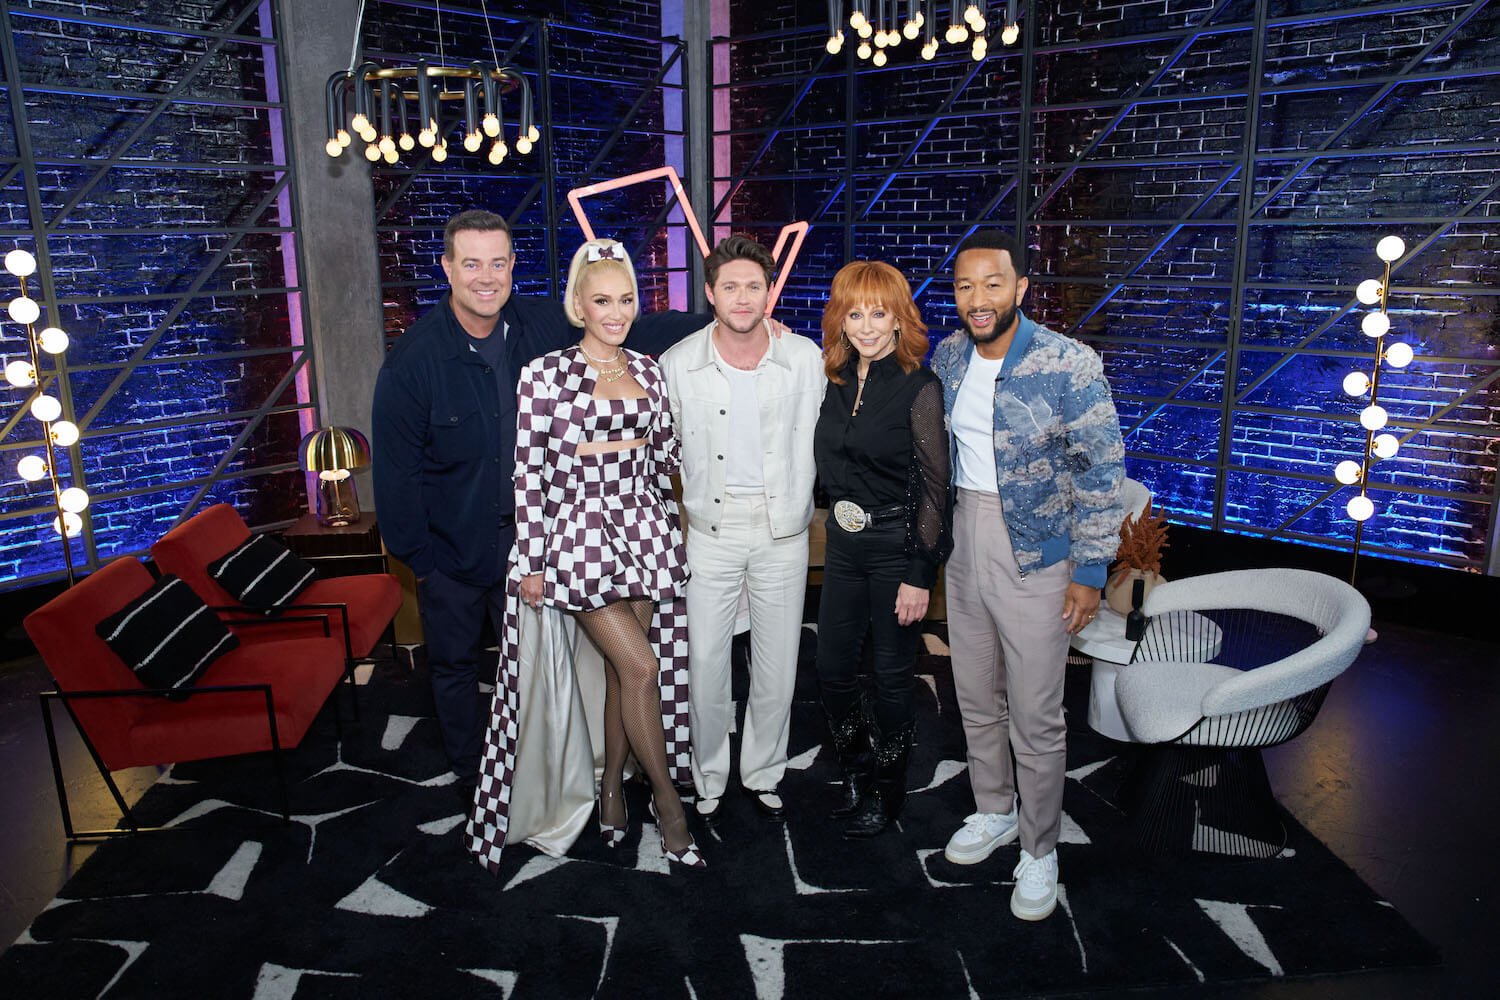 The Voice' Season 24 judges standing together and smiling